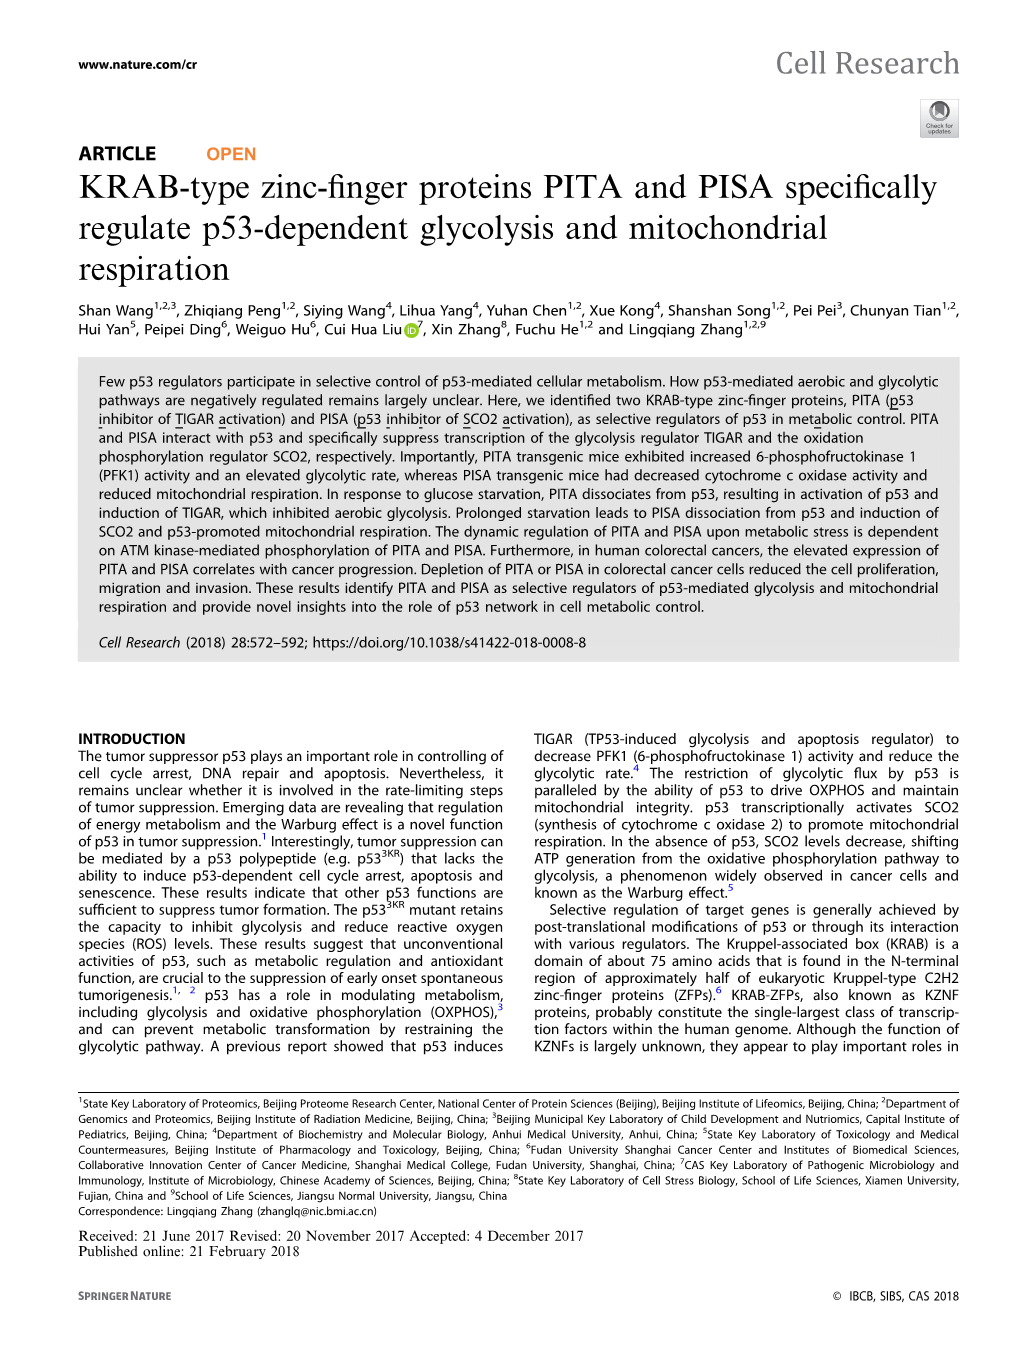 KRAB-Type Zinc-Finger Proteins PITA and PISA Specifically Regulate P53-Dependent Glycolysis and Mitochondrial Respiration